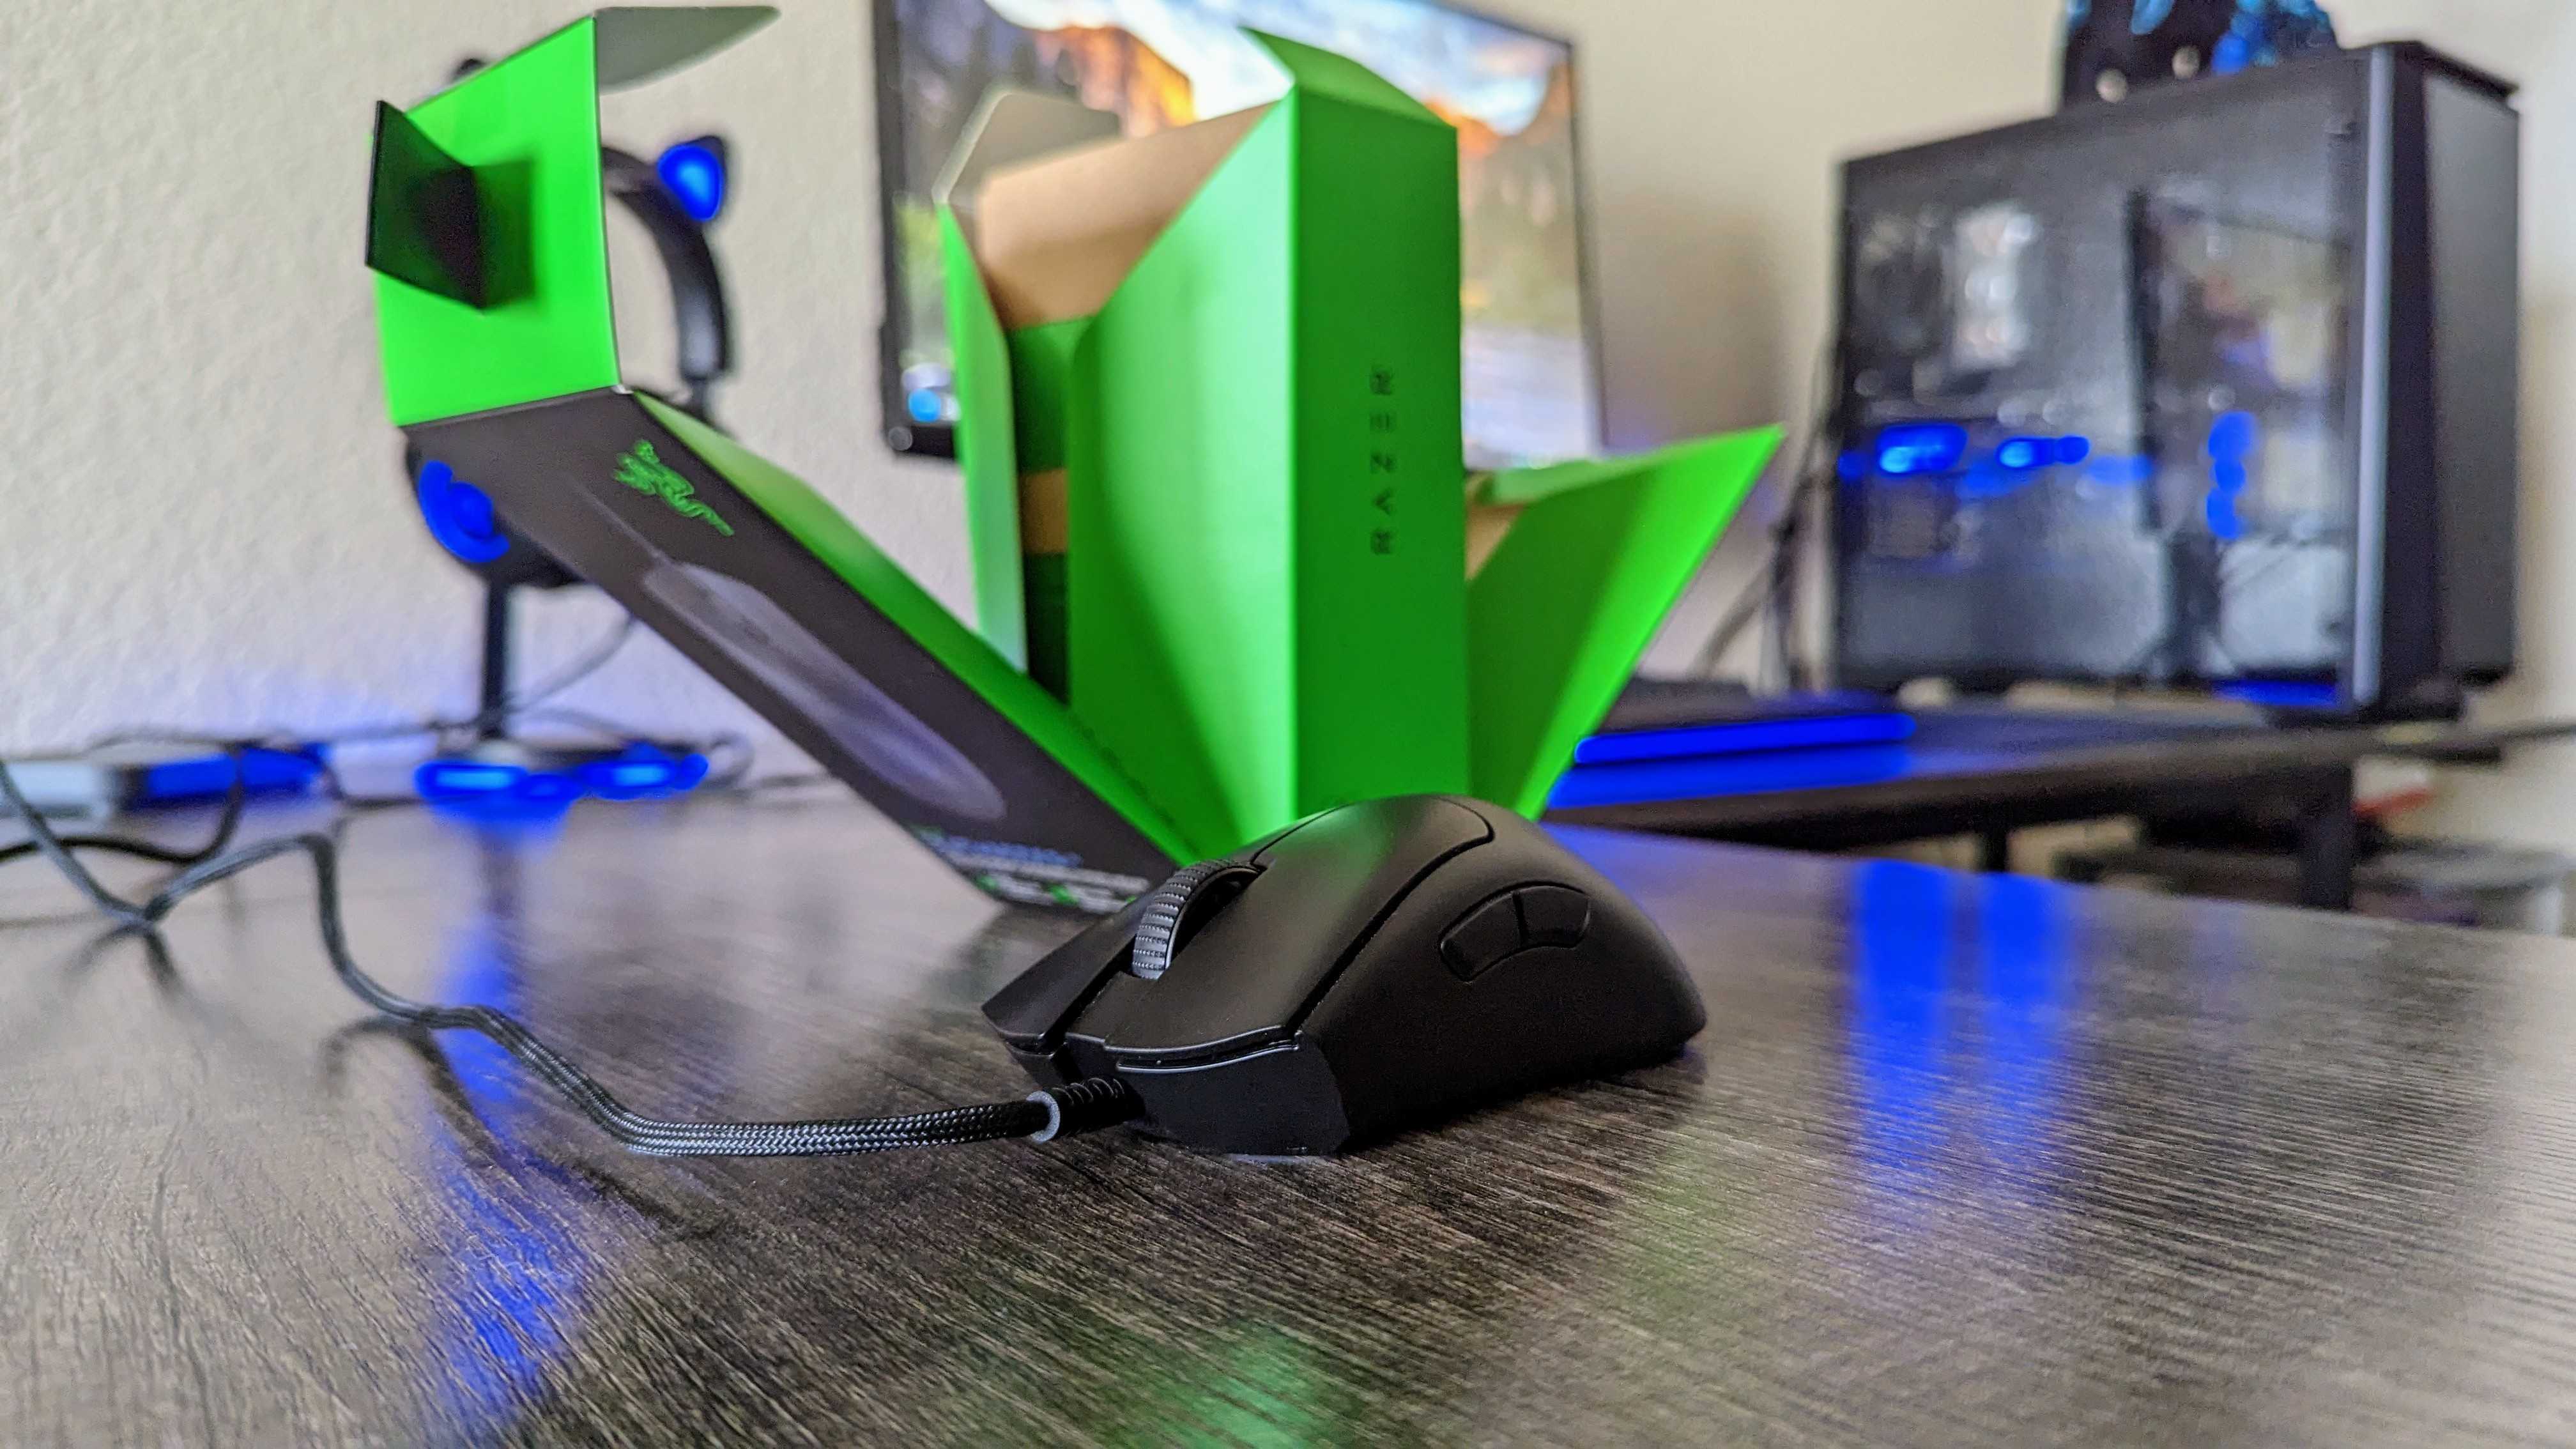 The Razer DeathAdder V3 on a desk, with its retail box open behind it.